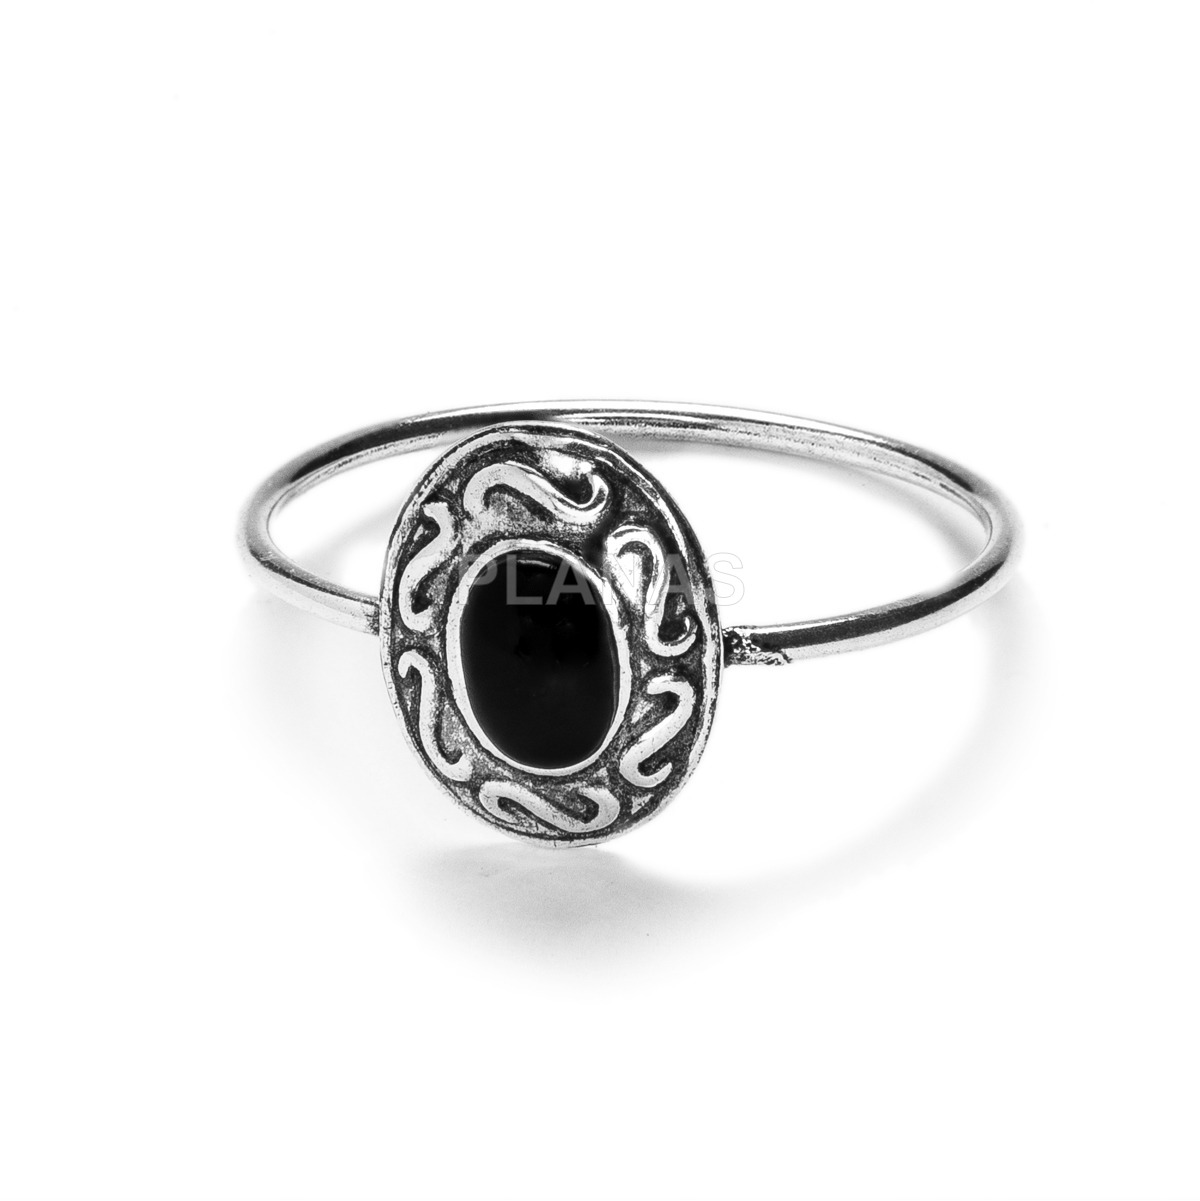 Ring in sterling silver and black enamel.